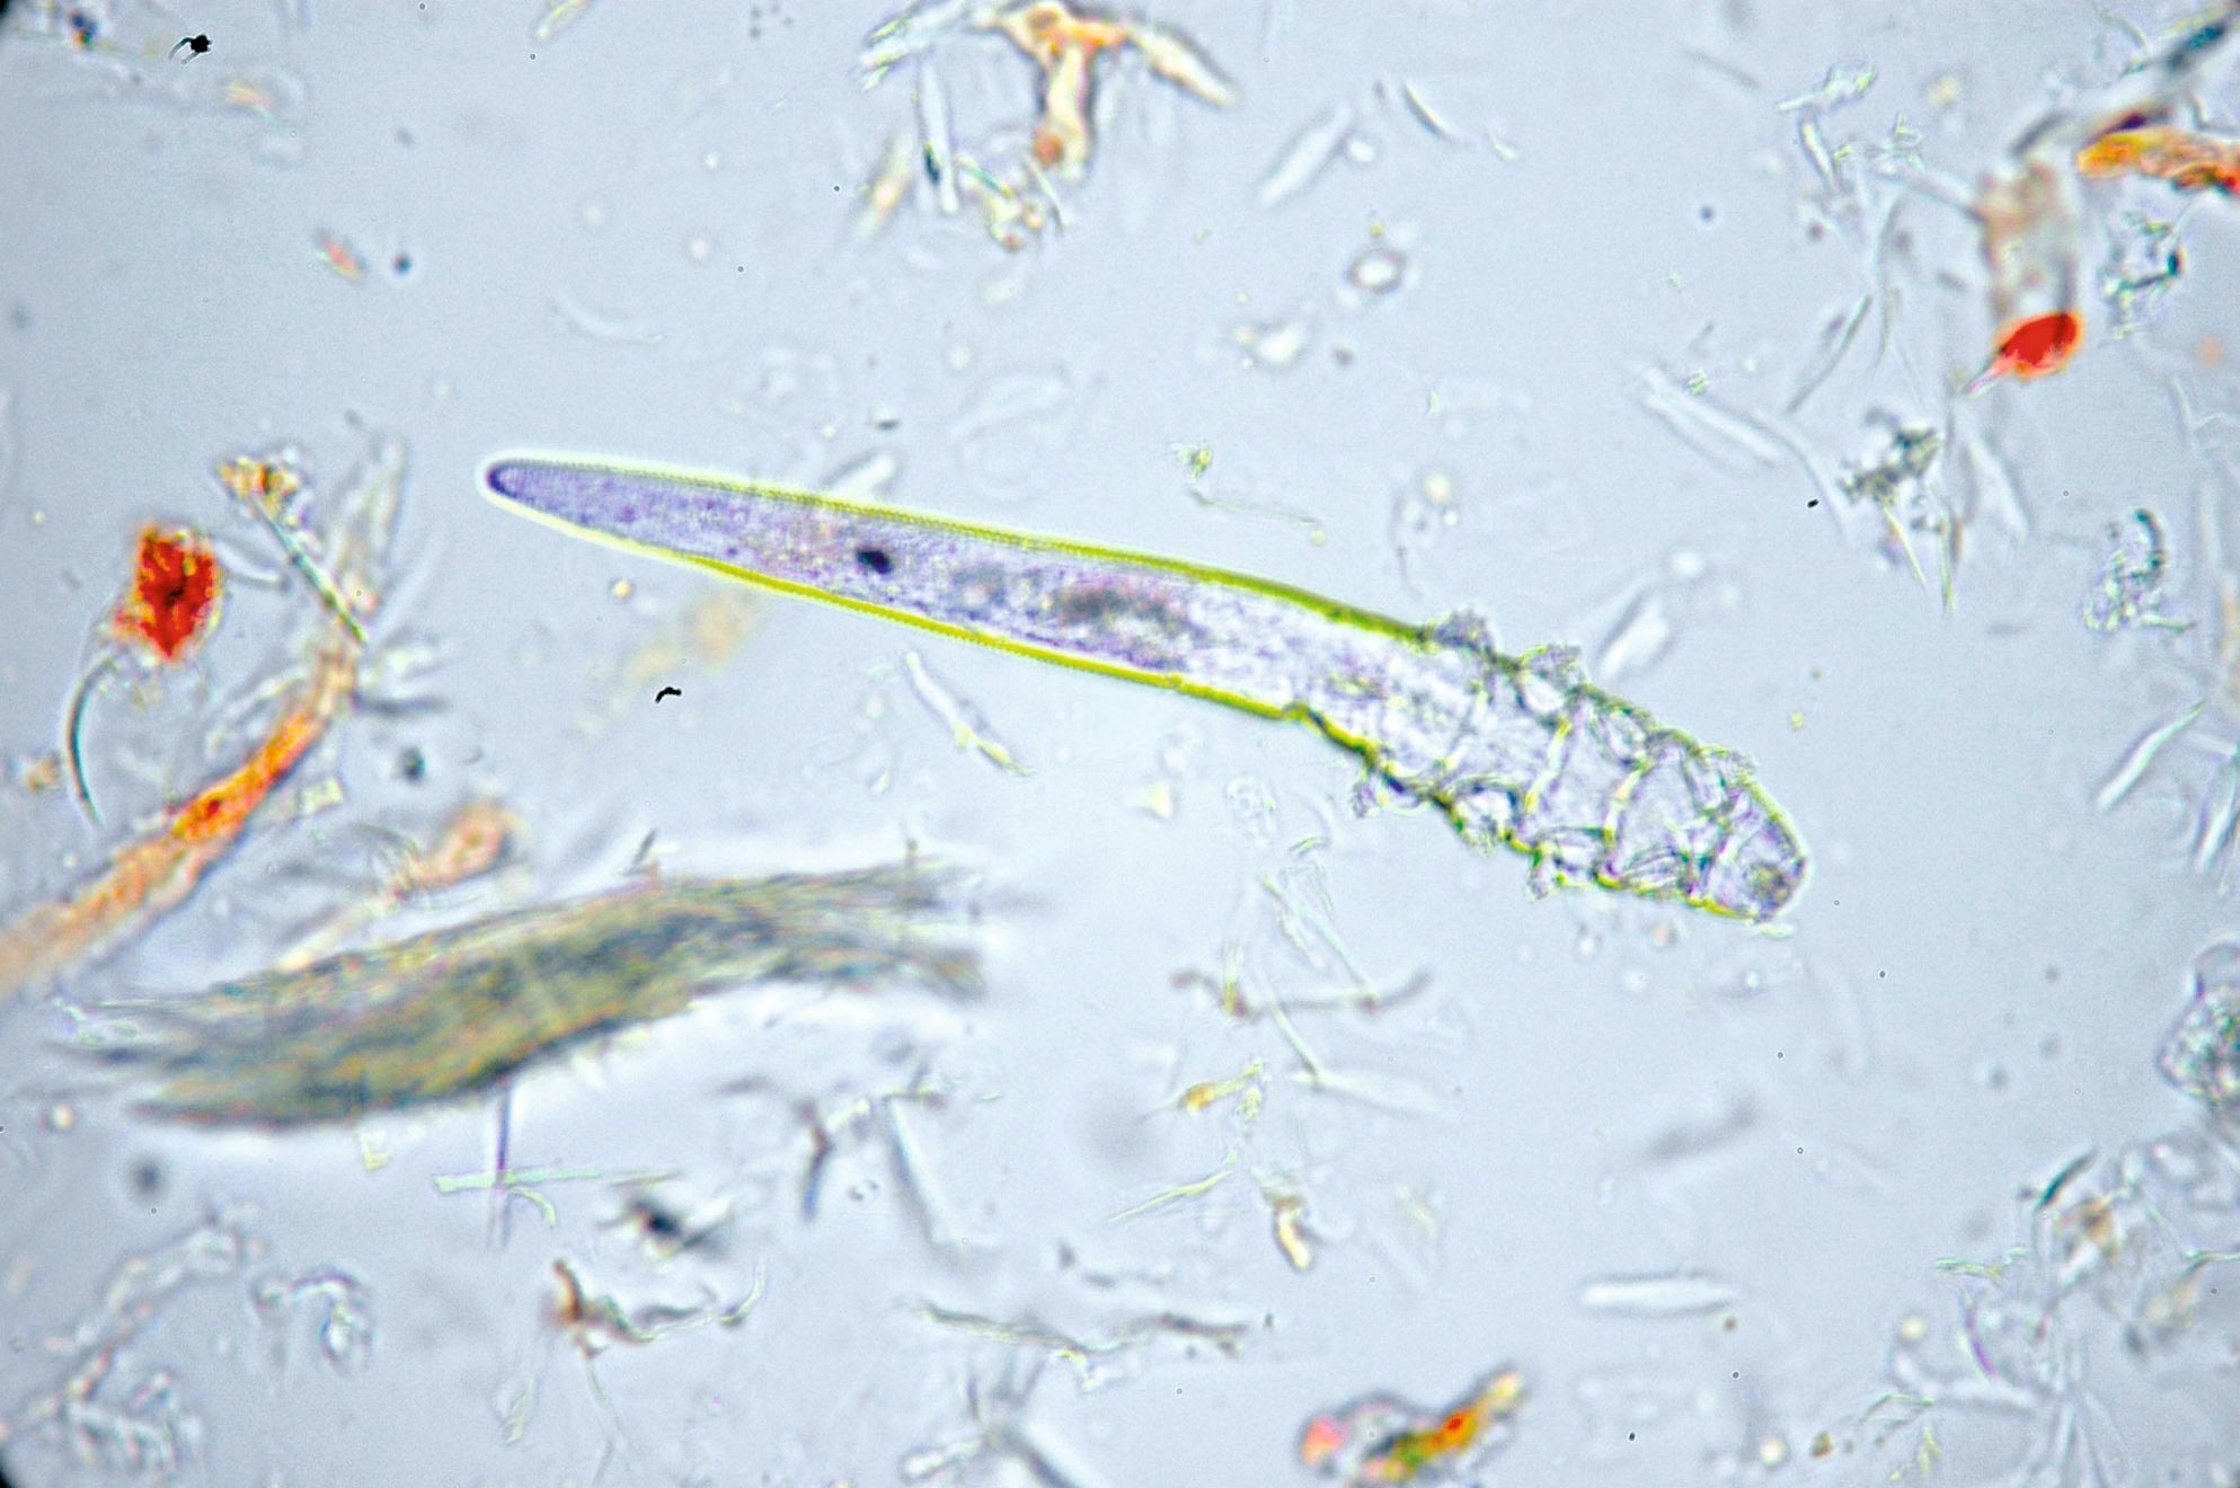 Demodex can present as a severe erythroderma, earning it the title “red mange”.